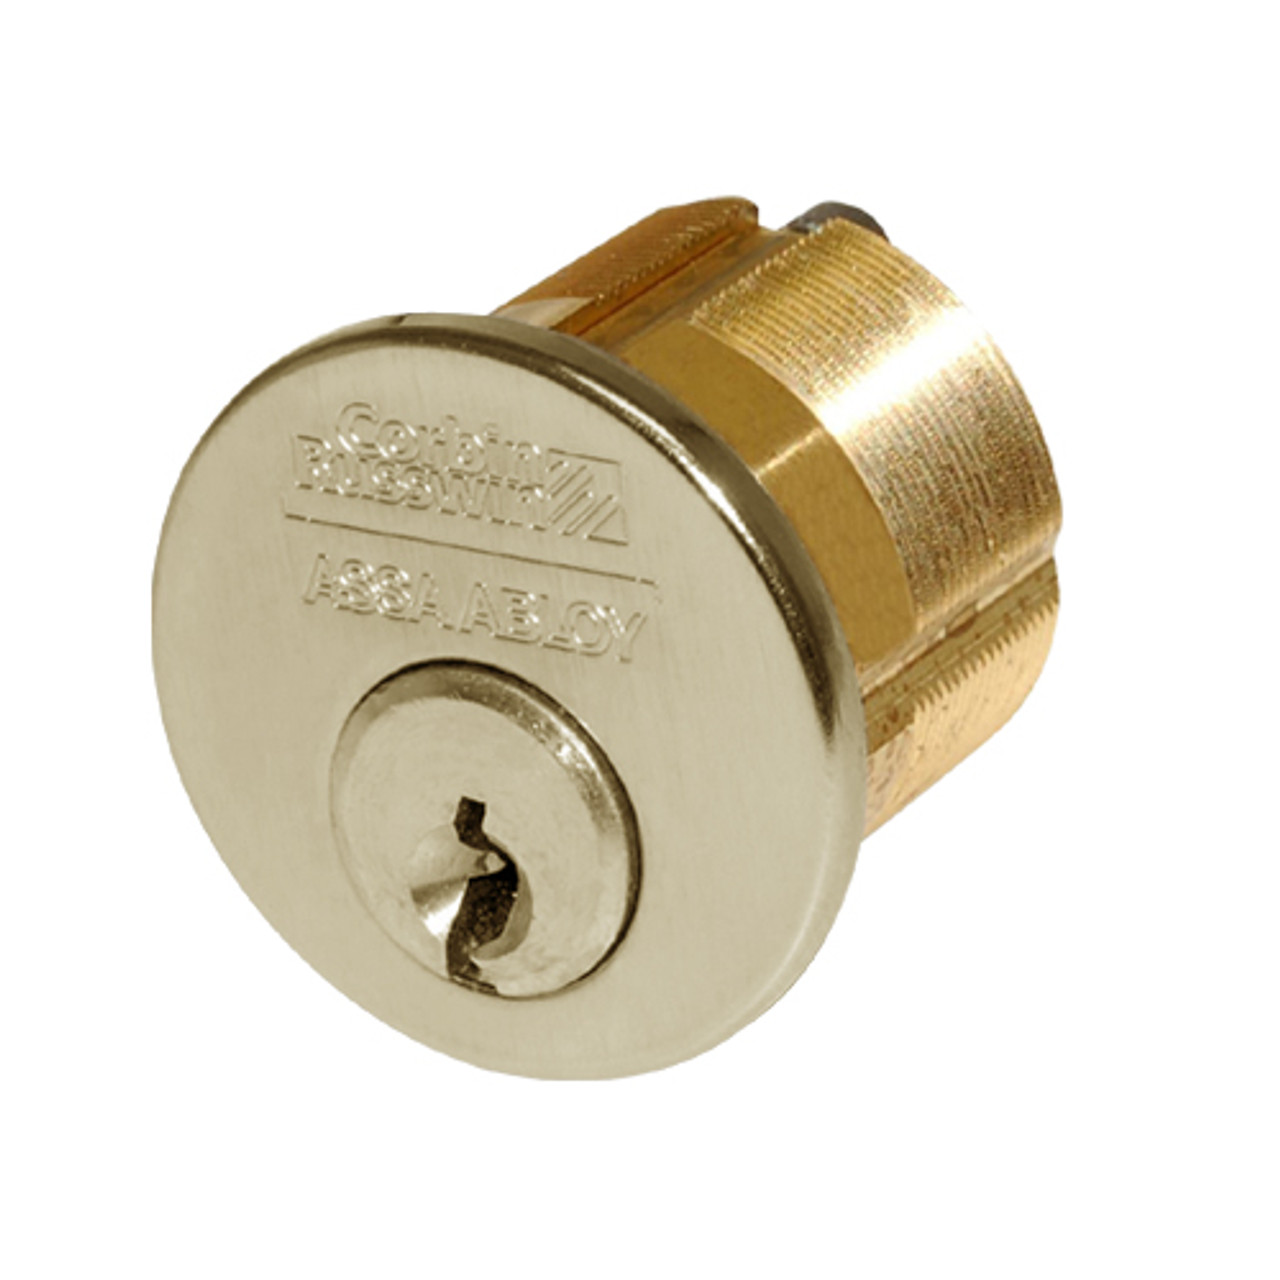 CR1000-114-A06-6-D1-606 Corbin Conventional Mortise Cylinder for Mortise Lock and DL3000 Deadlocks with Schlage L9000 Cam in Satin Brass Finish